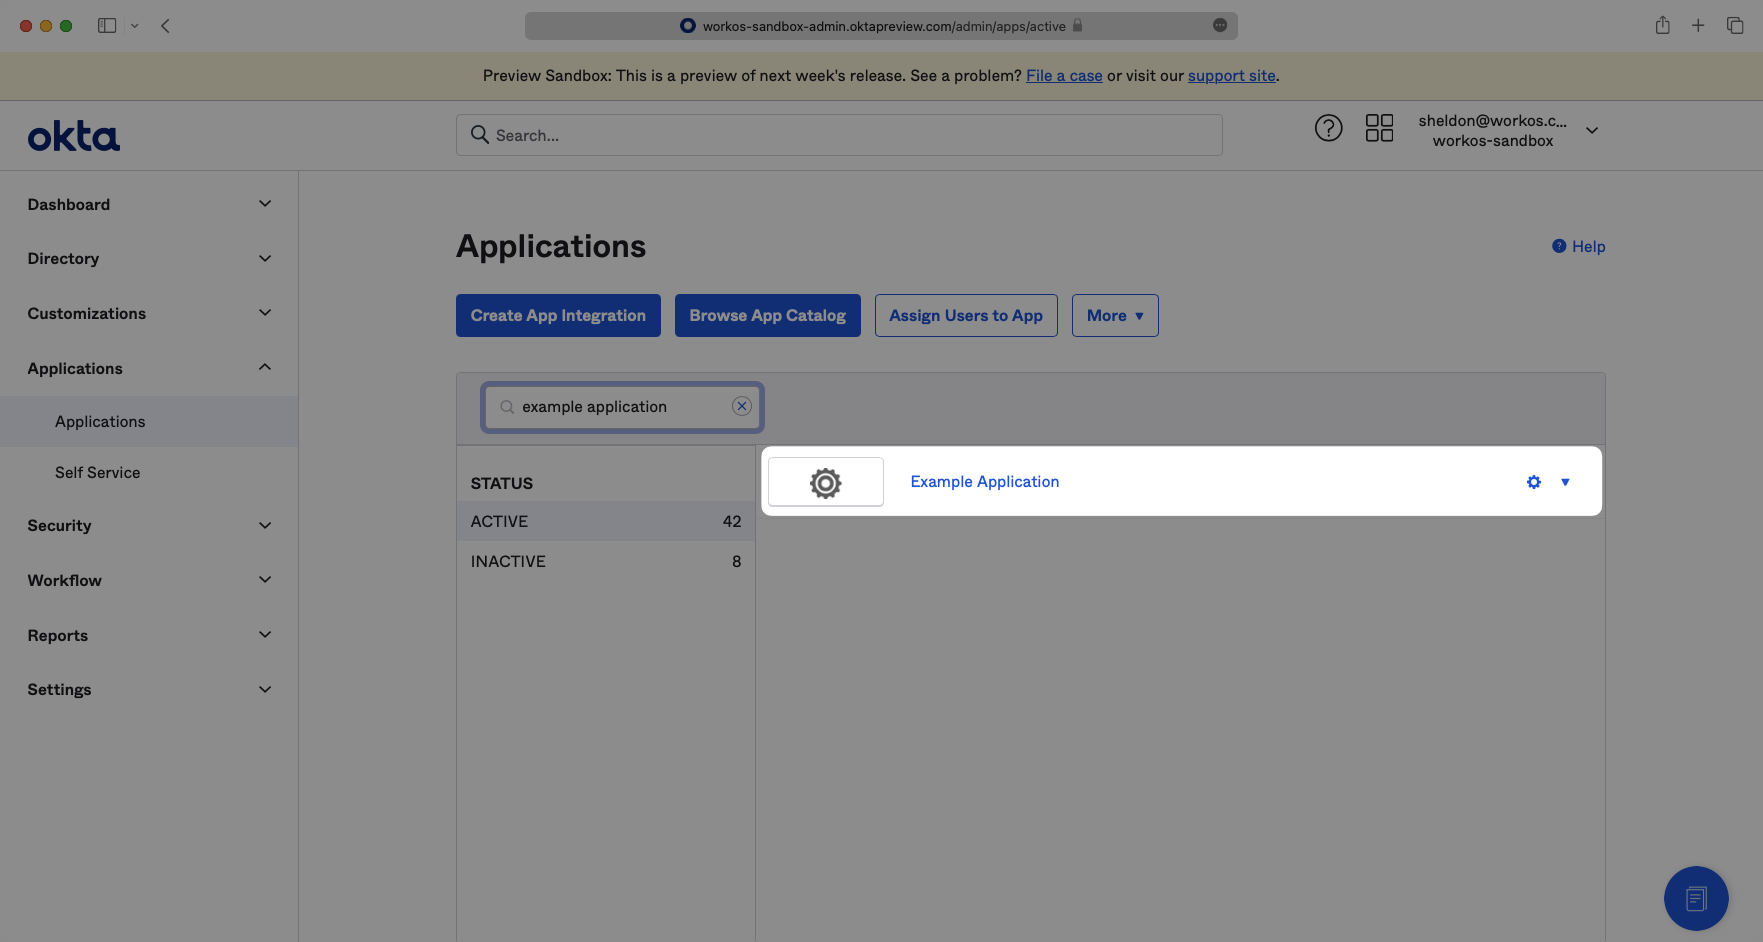 A screenshot showing existing applications in the Okta Dashboard.